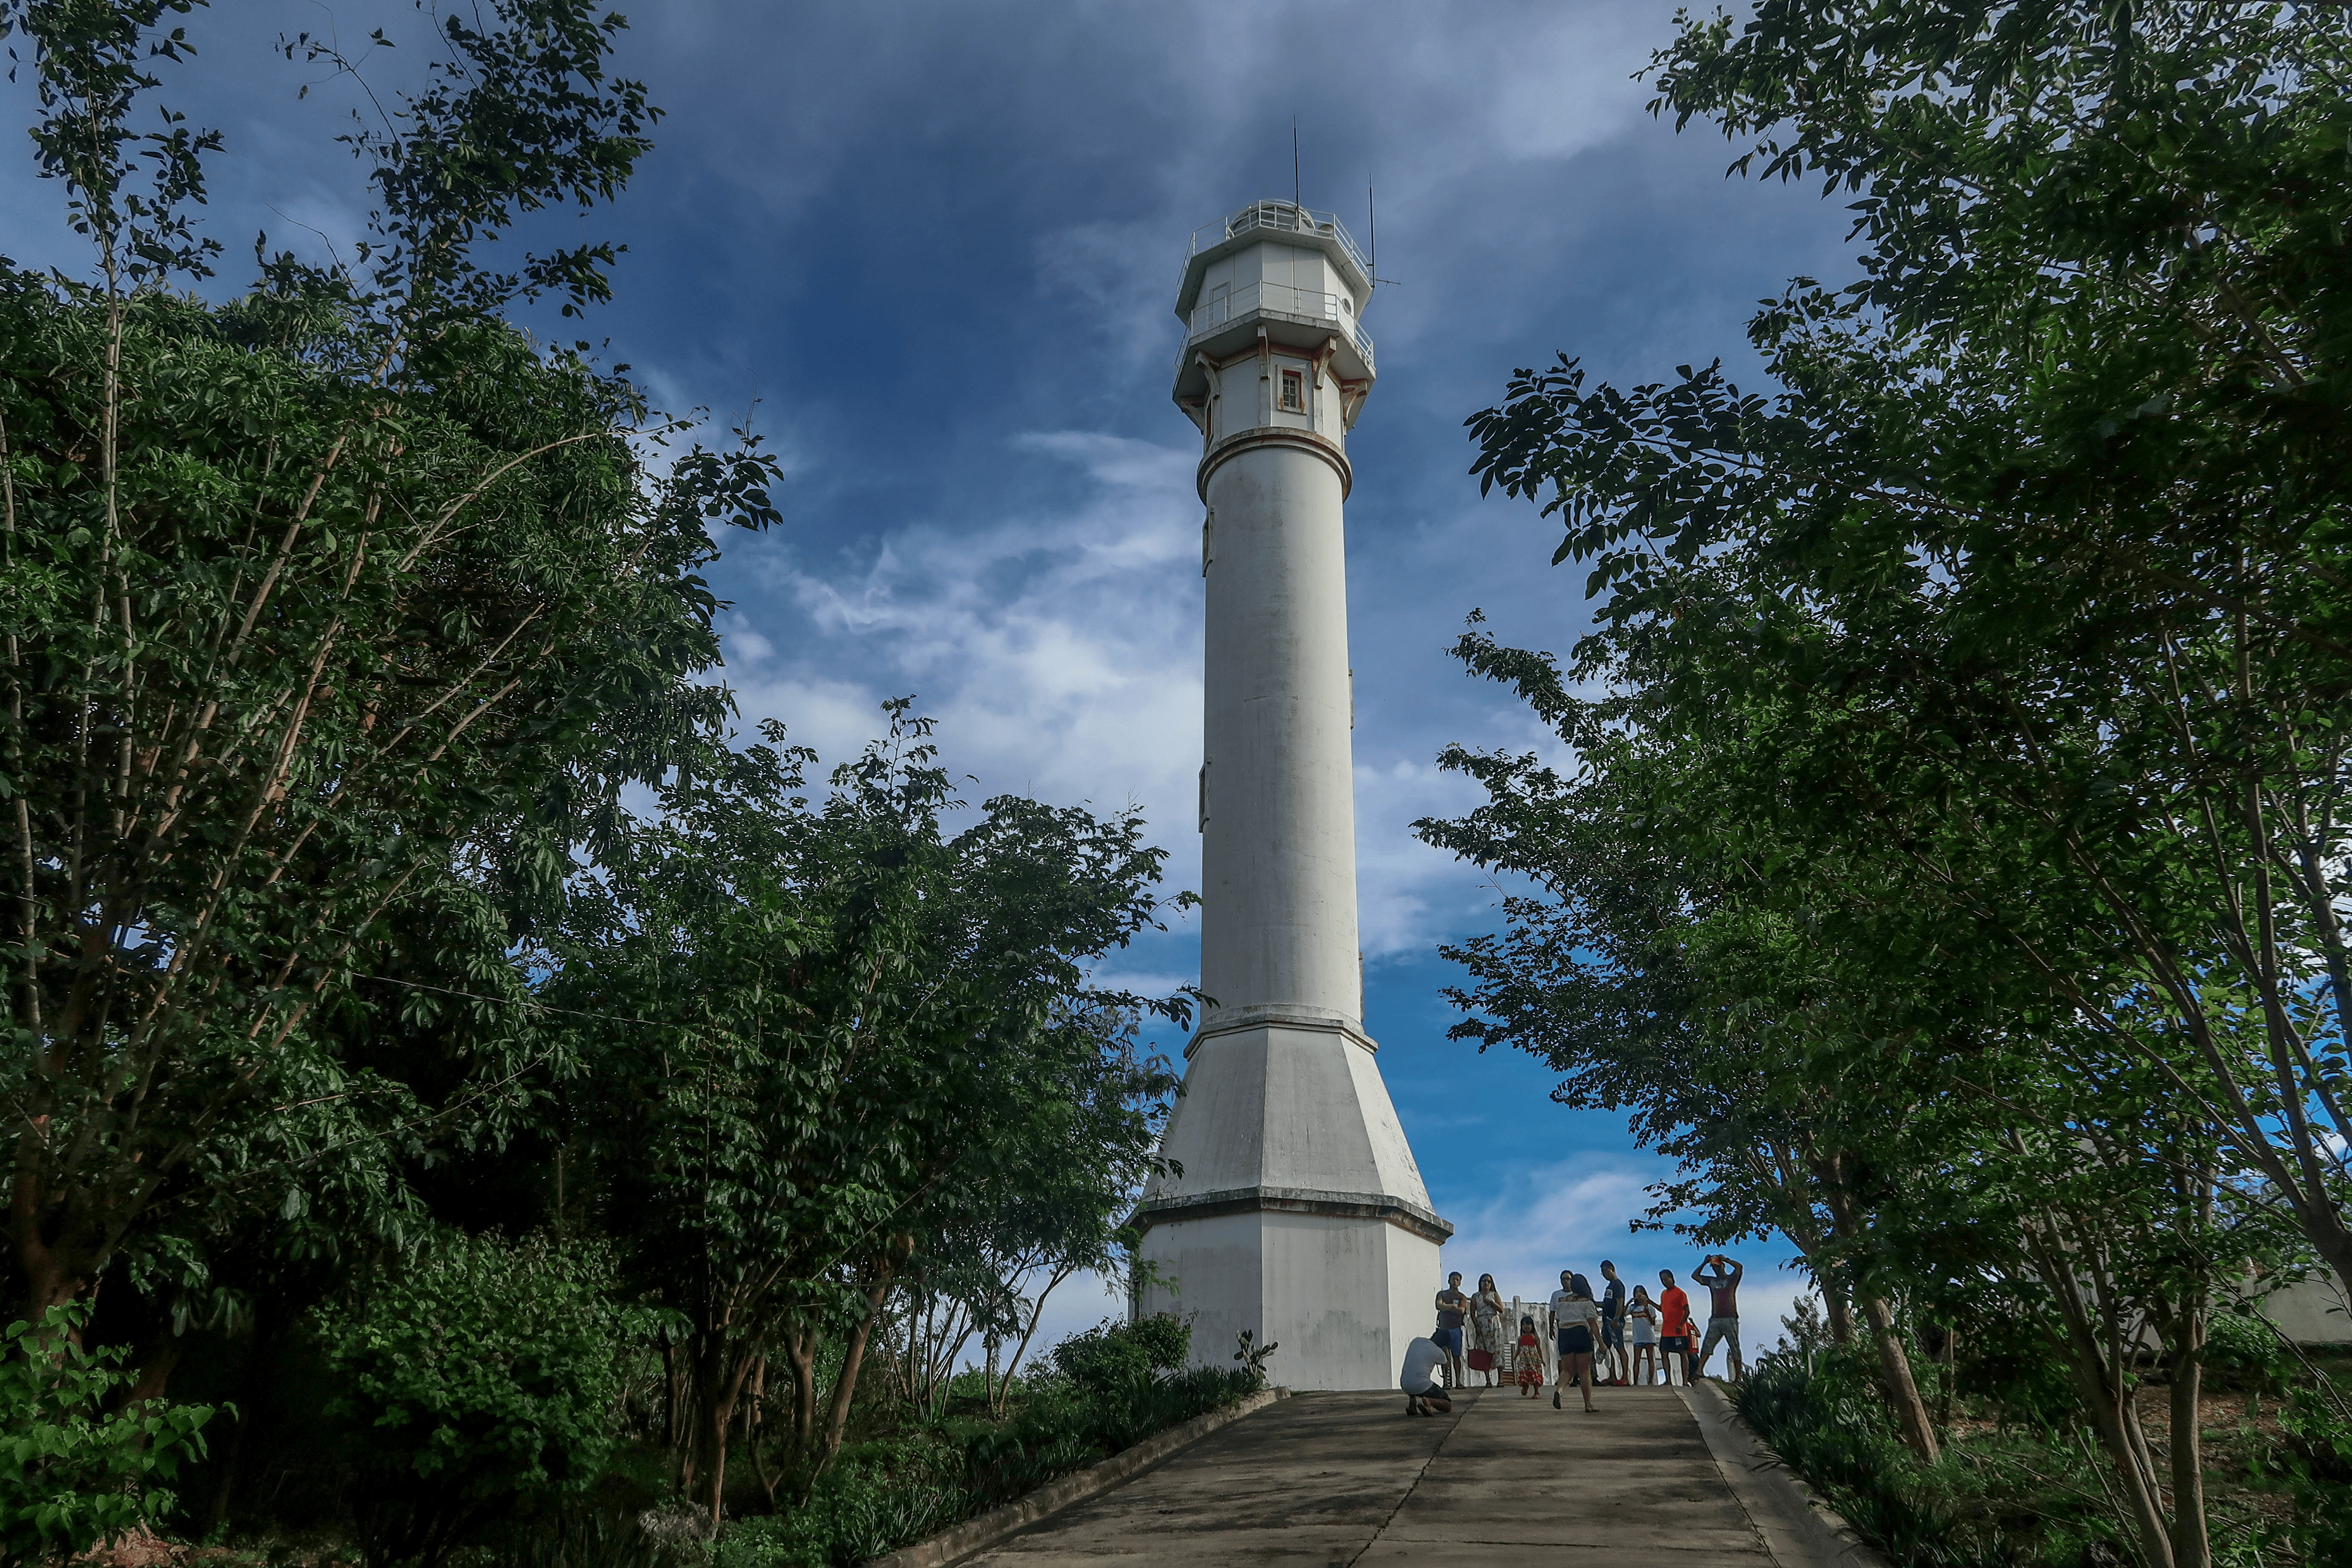 cape bolinao lighthouse in pangasinan province philippines with tourists